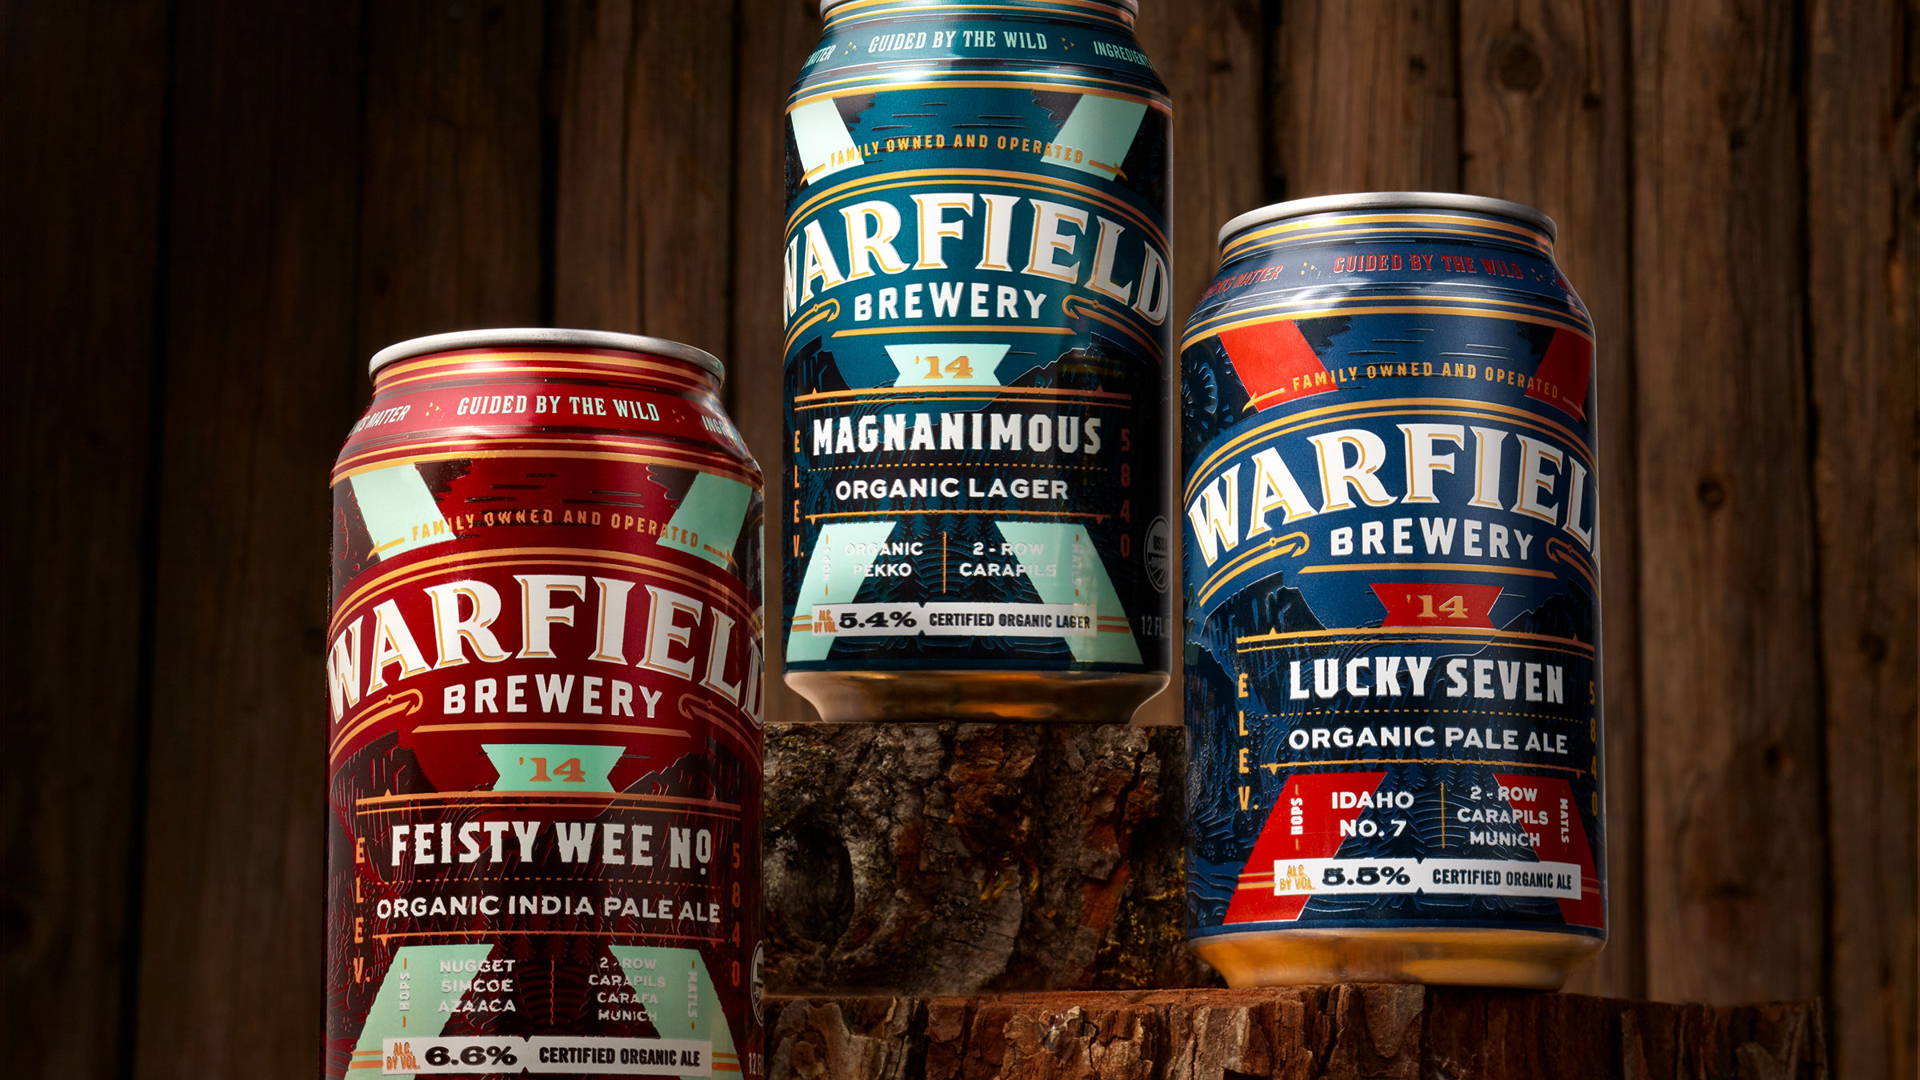 Featured image for Warfield Brewing Companys's Cans Are Guided By The Wild